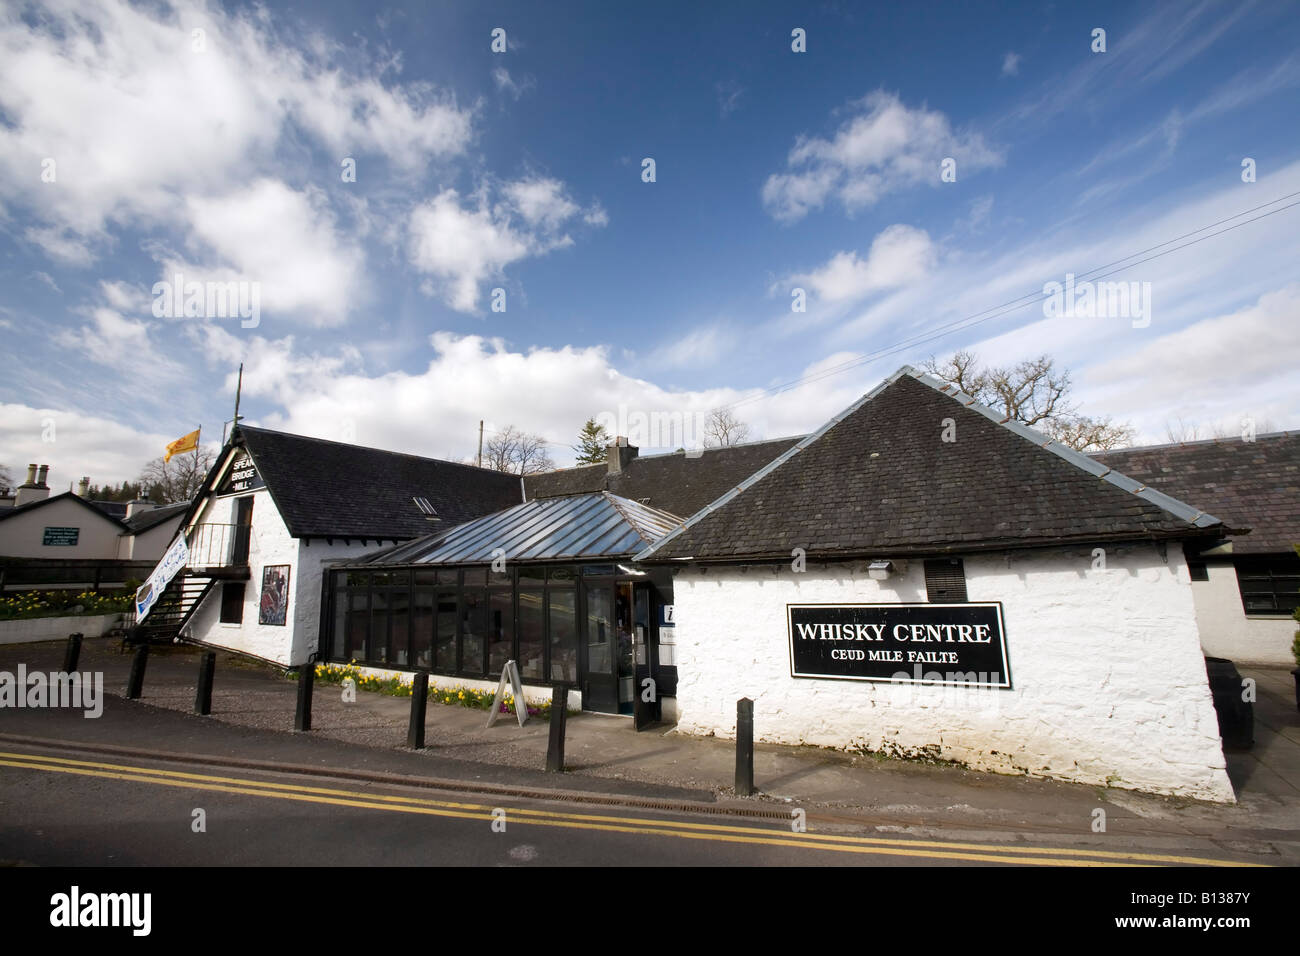 View on a Whisky Visitors Centre in the Scottish Highlands, United Kingdom Stock Photo